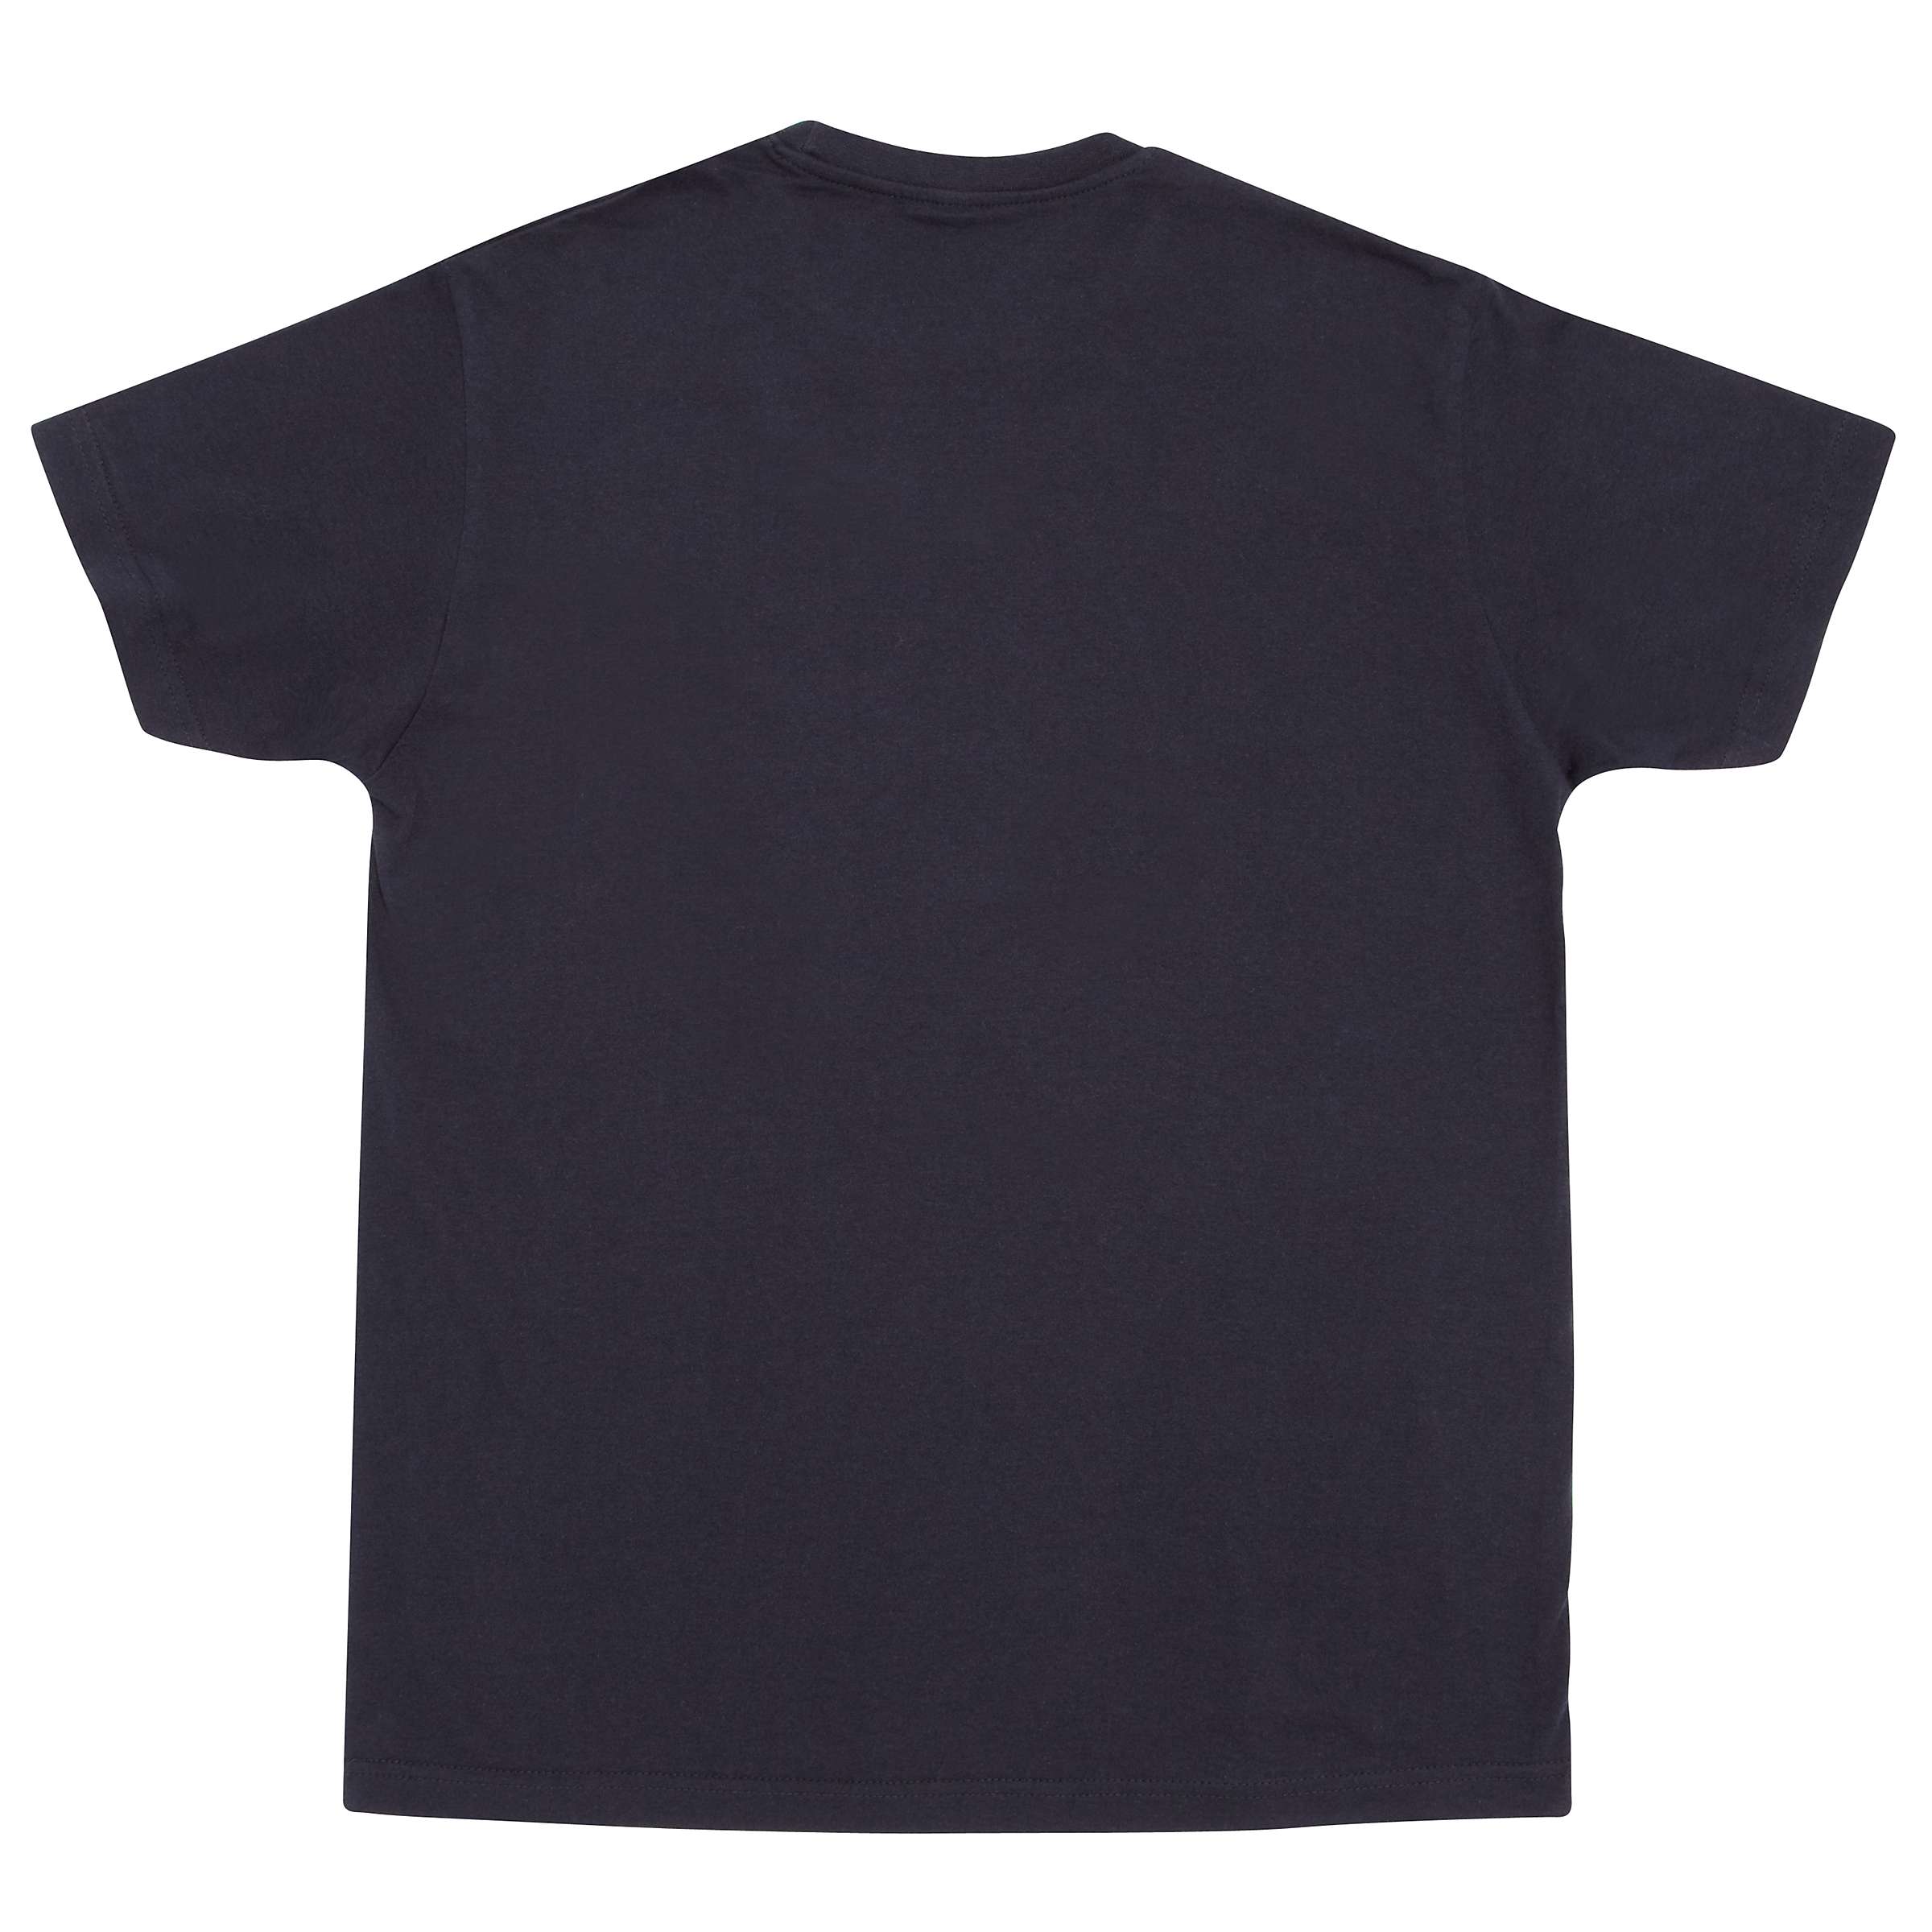 Buy Howell's College Unisex T-Shirt, Navy Online at johnlewis.com